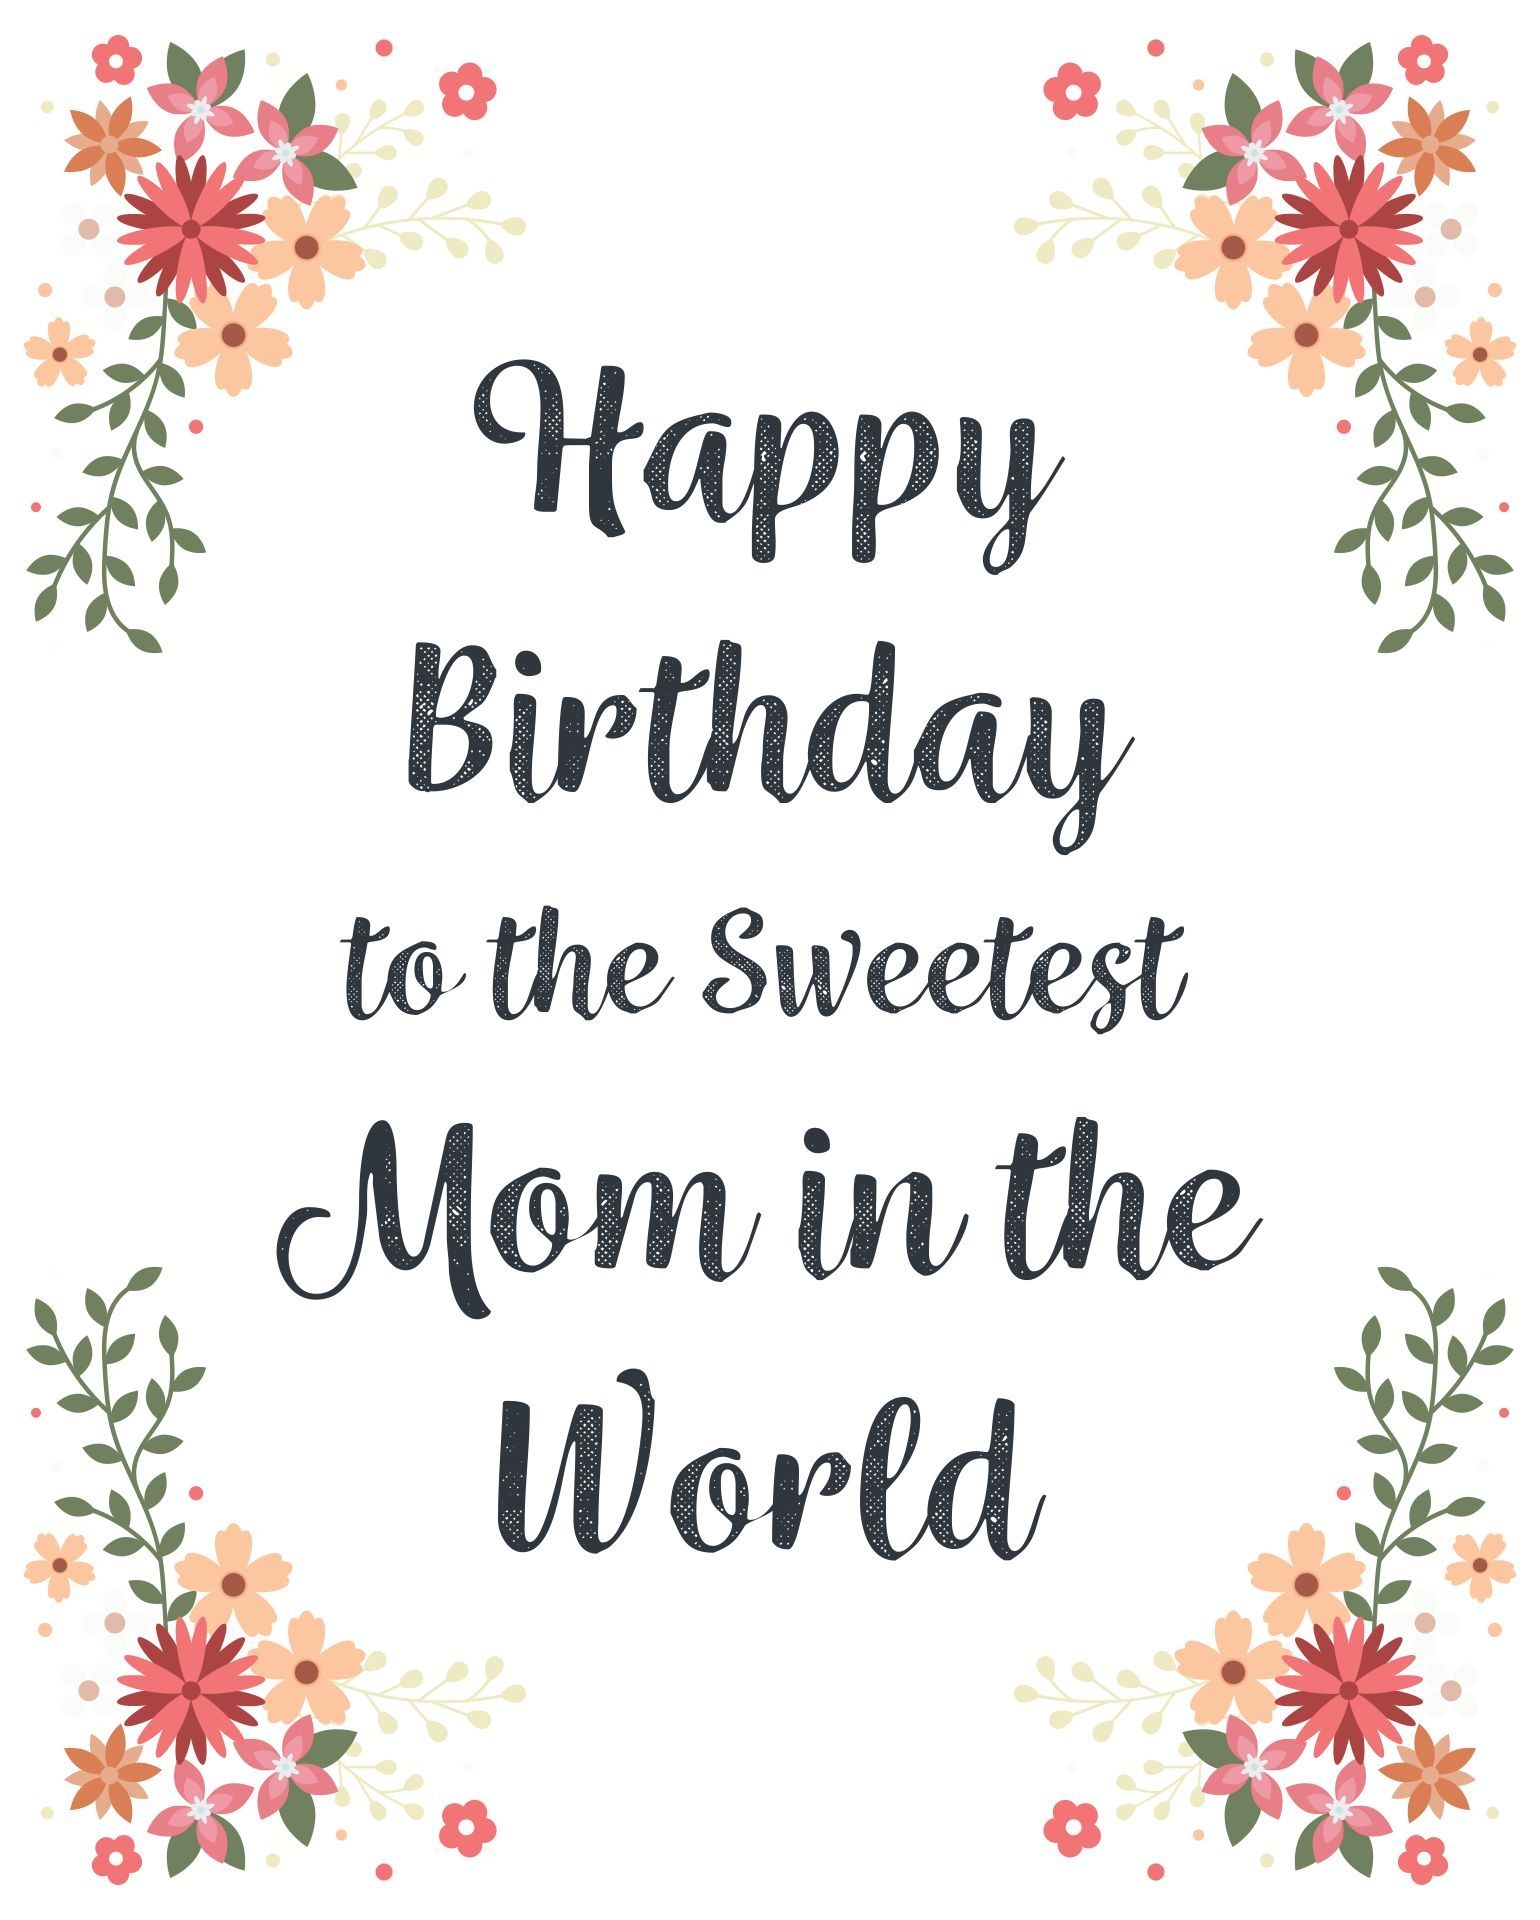 Printable Birthday Cards For Mom From Daughter Happy Birthday Mom Cards Free Printable Birthday Cards Birthday Cards For Mother